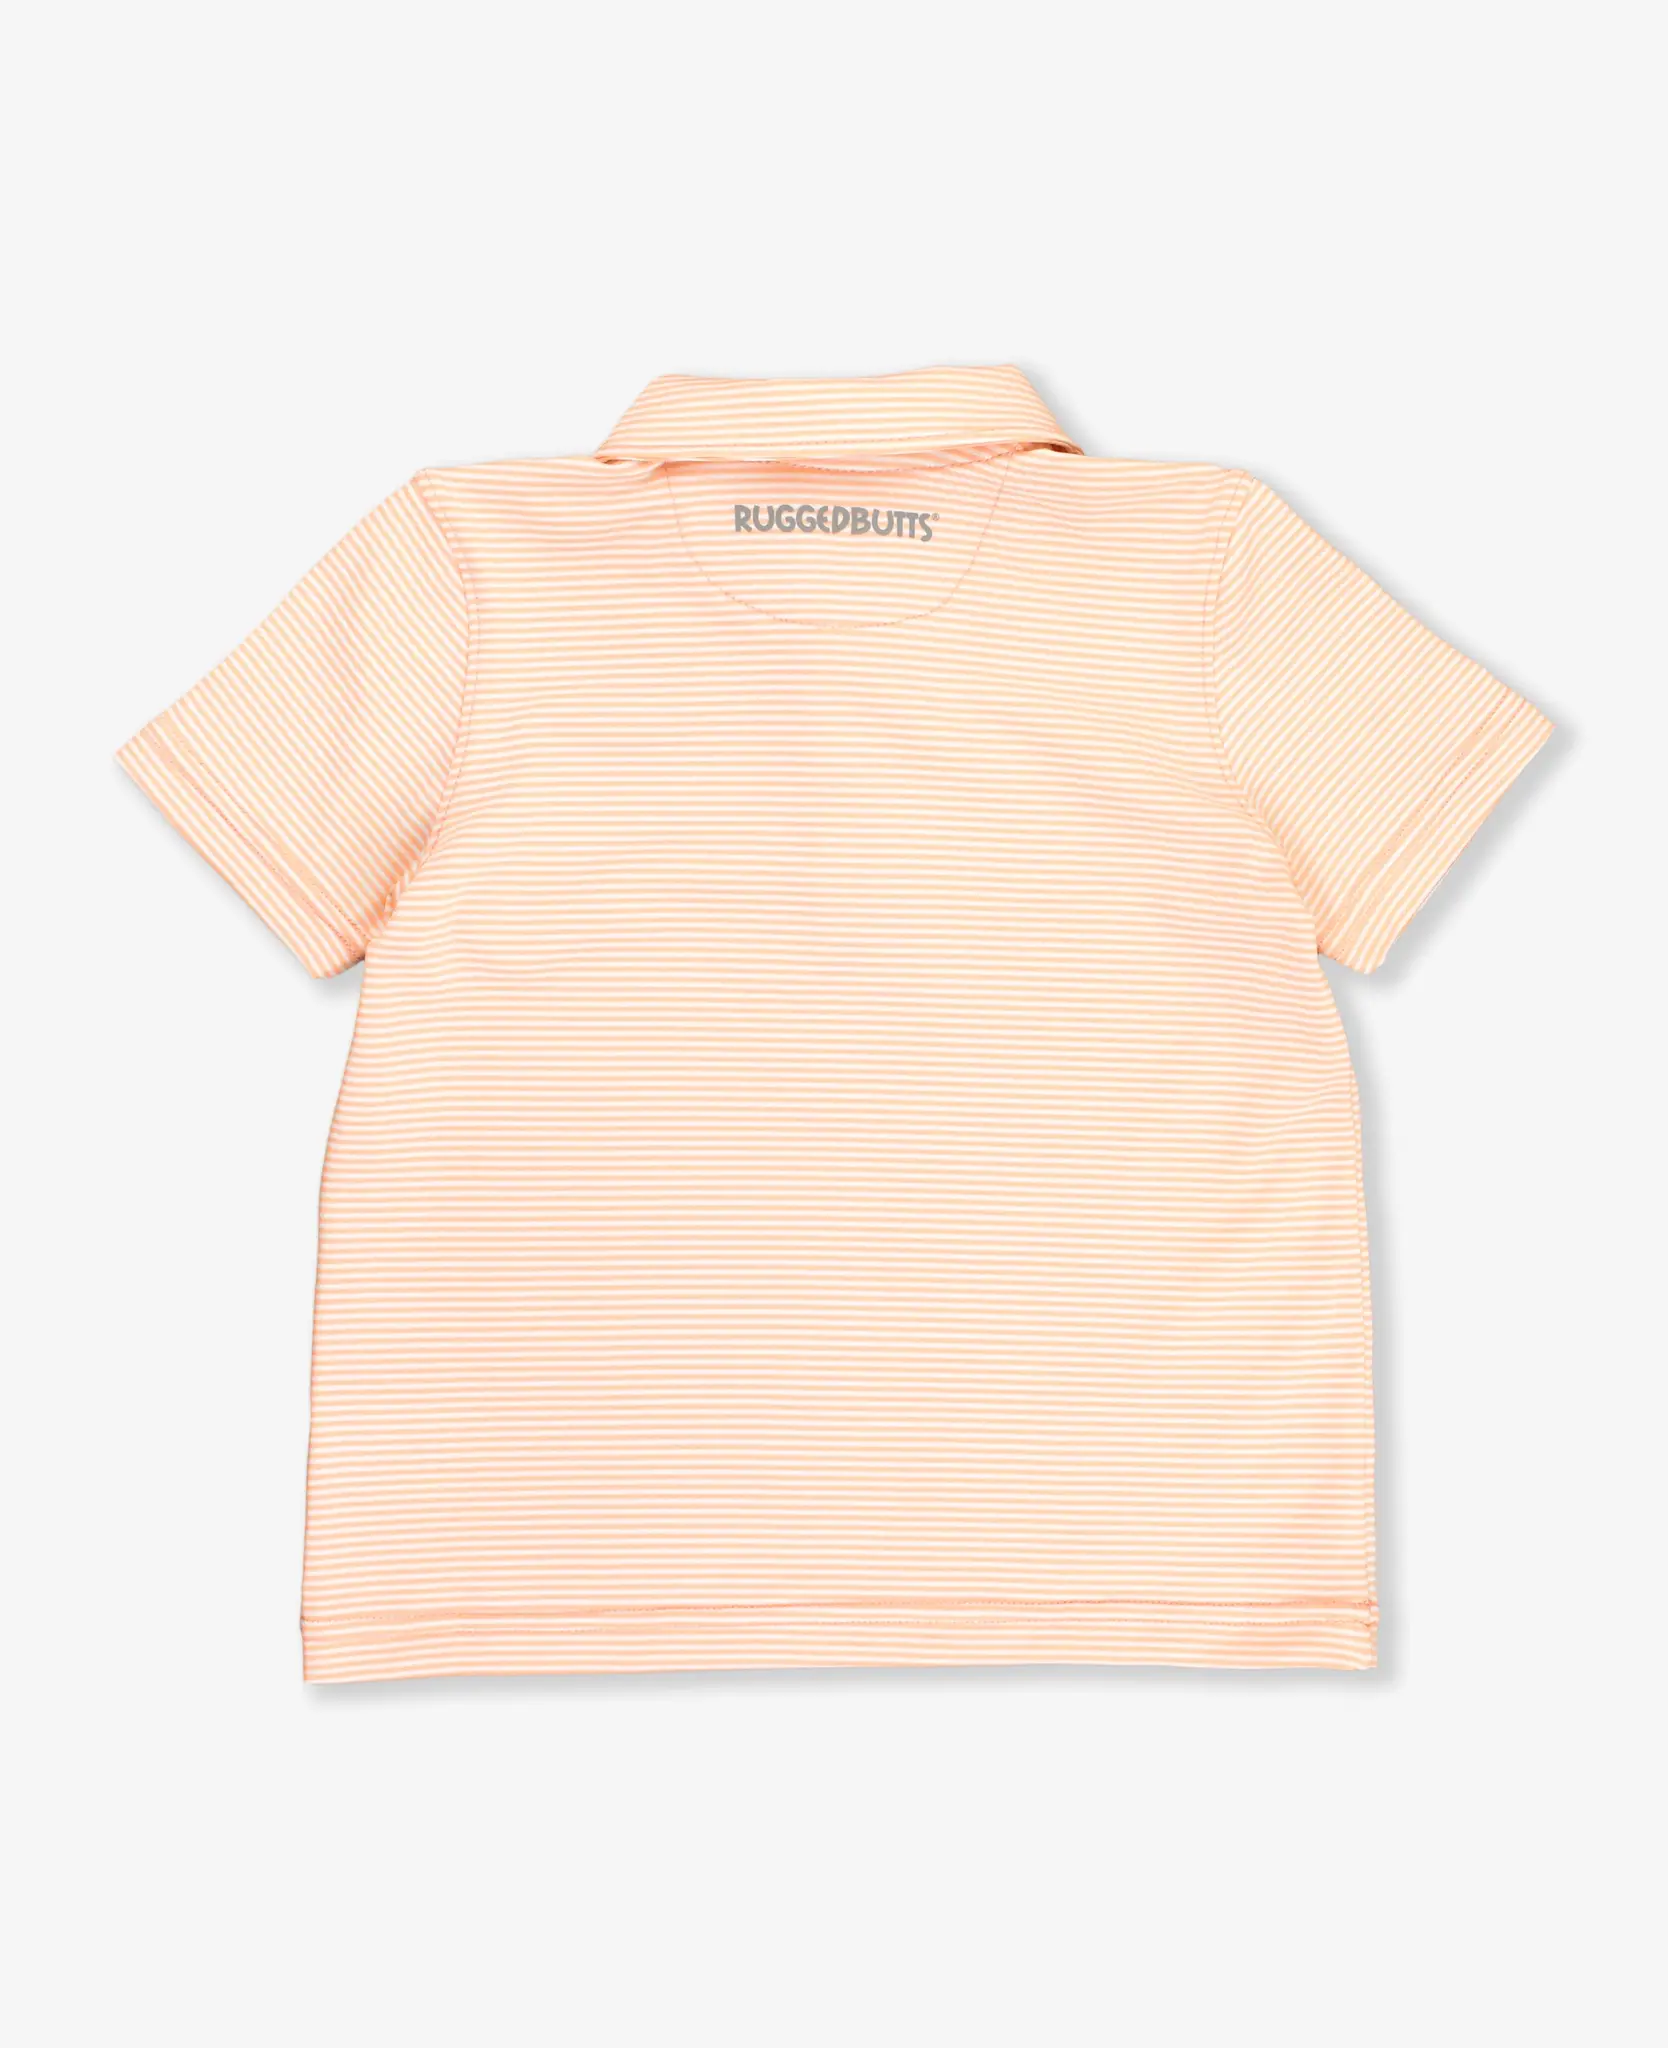 Ruffle Butts/Rugged Butts Knit SS Performance Polo Salmon Micro Stripe